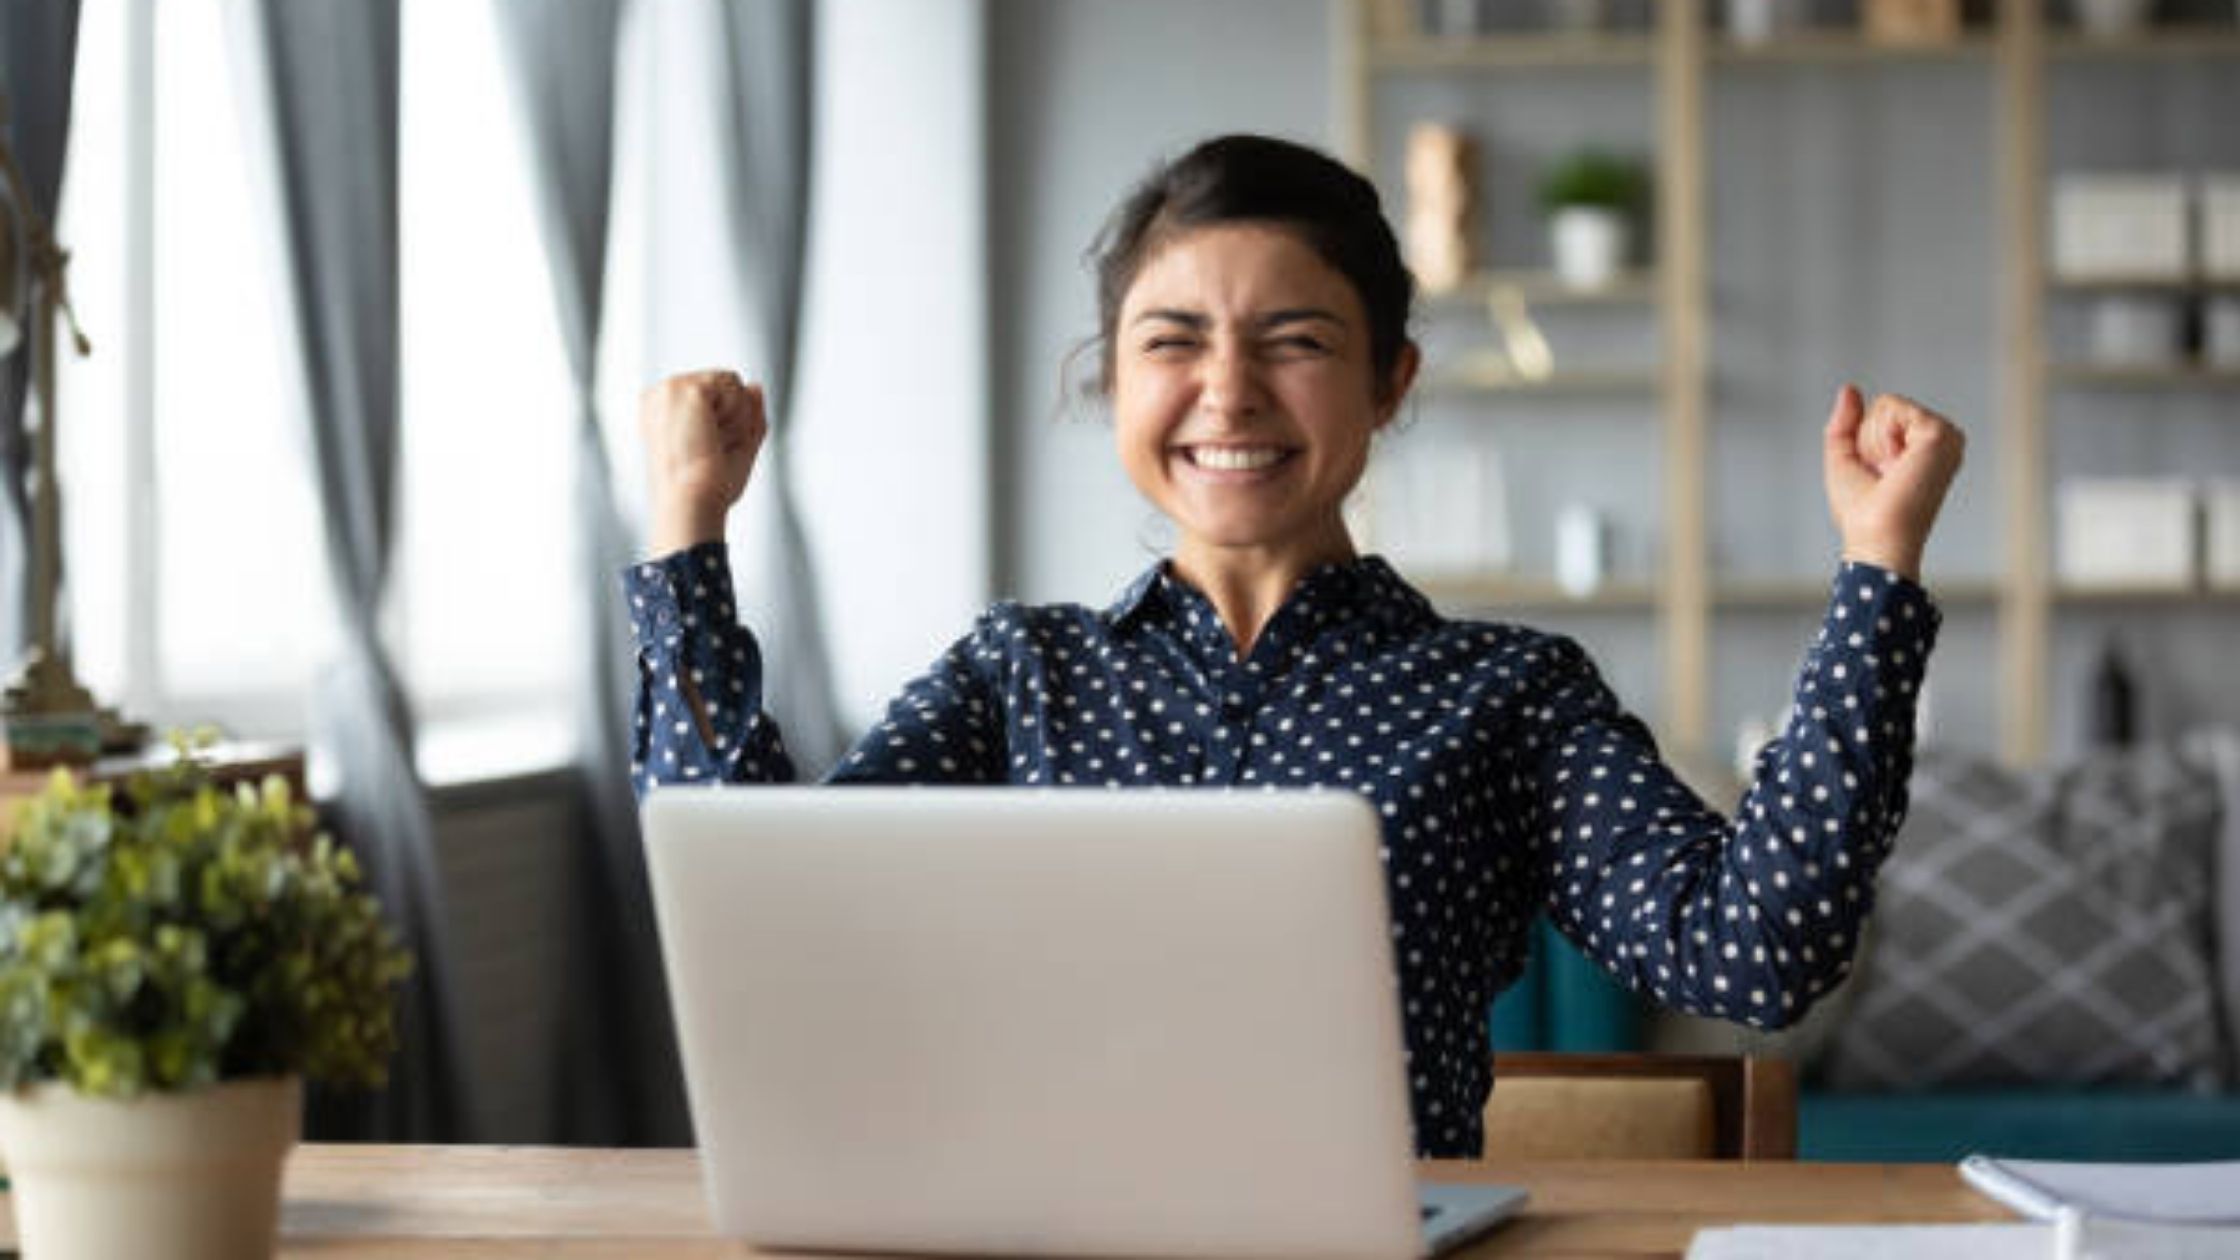 A woman celebrates with raised fists in front of her laptop at a home office desk after successfully learning to write cold emails.